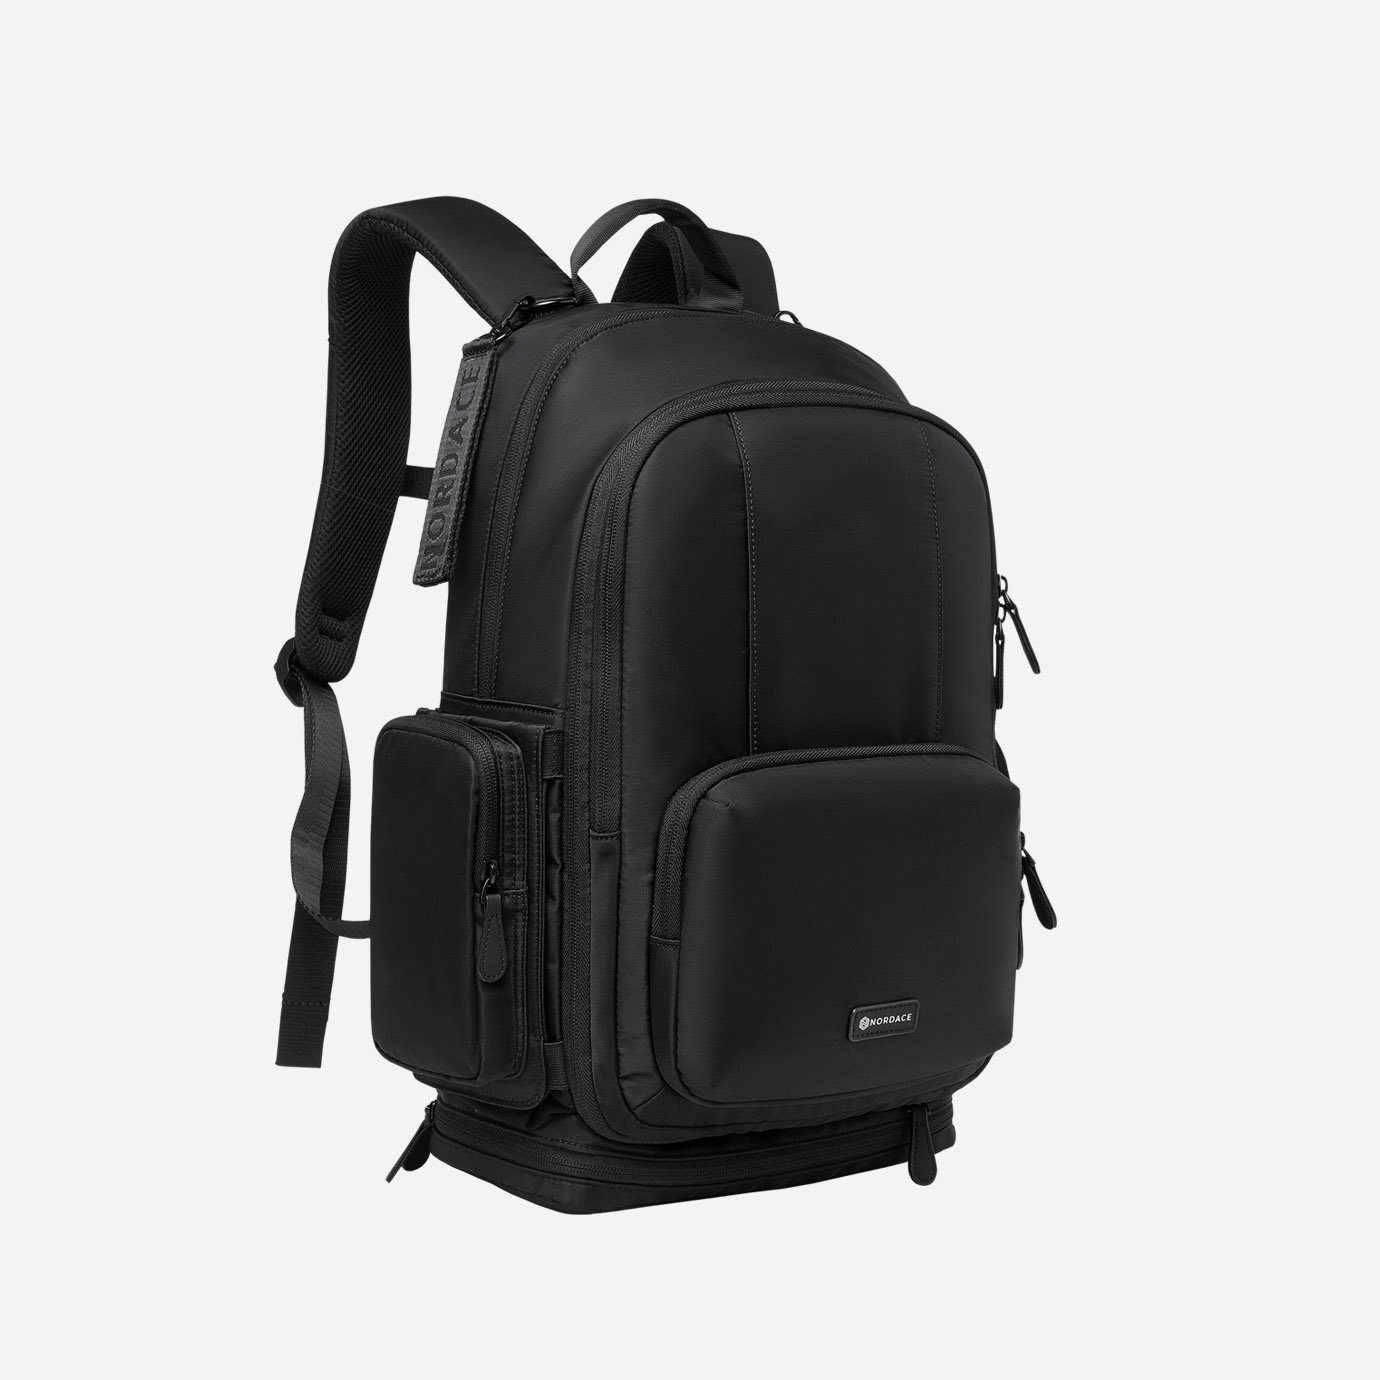 Nordace Backpacks | Audon Emmity Baby Diaper Backpack-Black